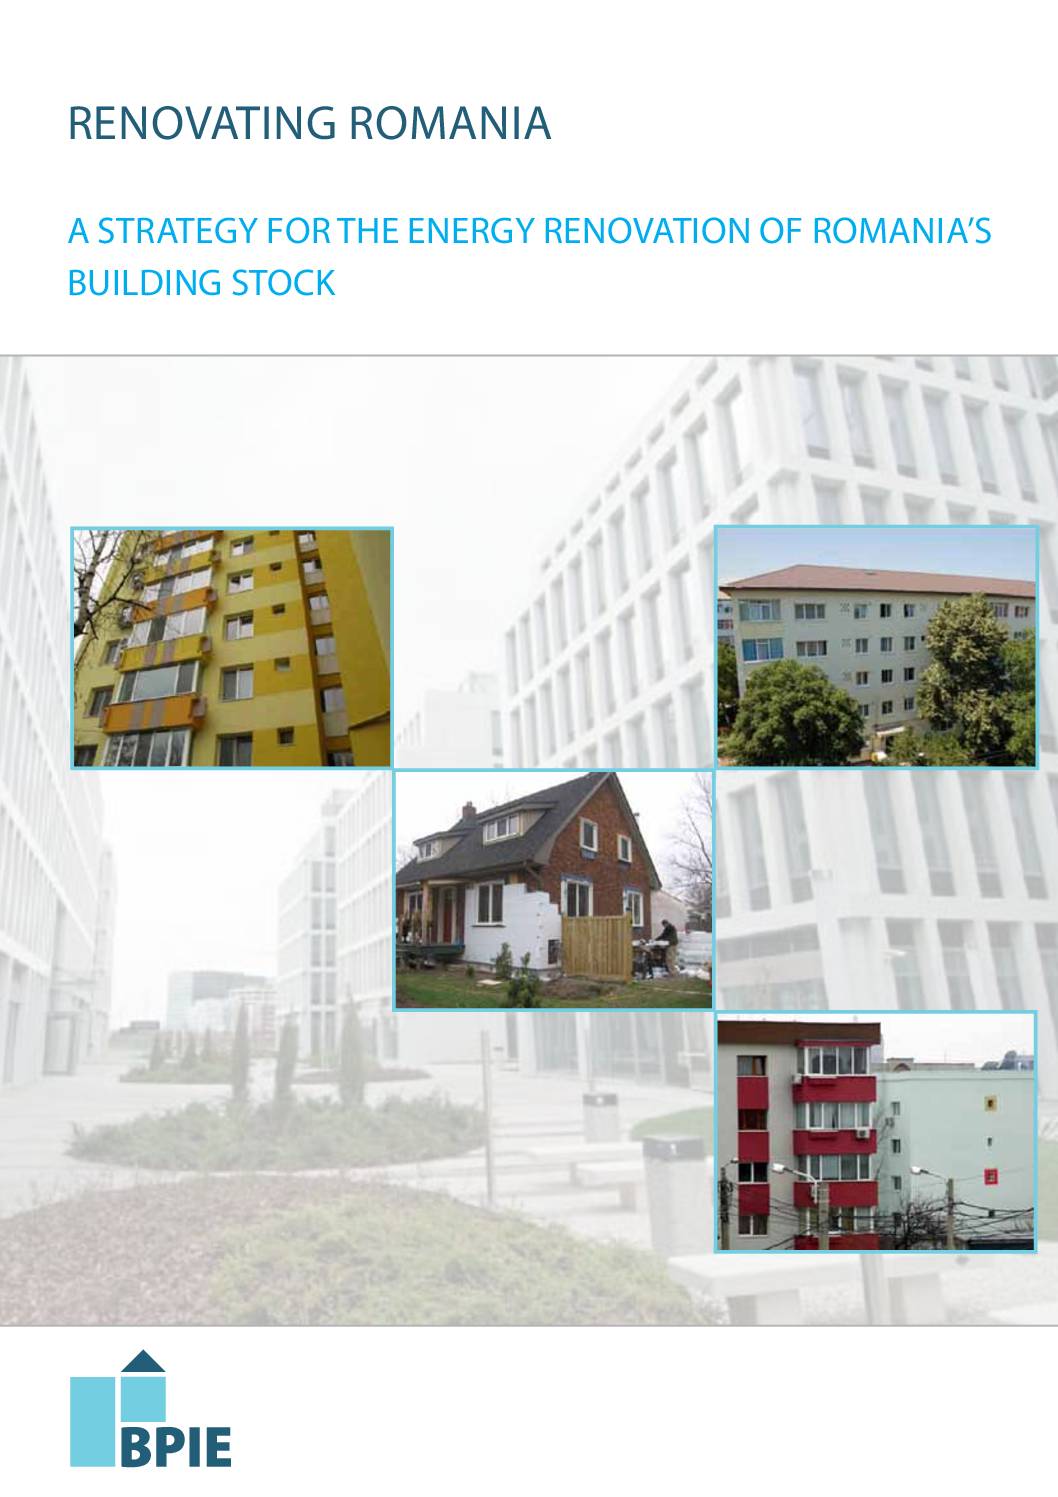 A Strategy for the Energy Renovation of Romania’s Building Stock